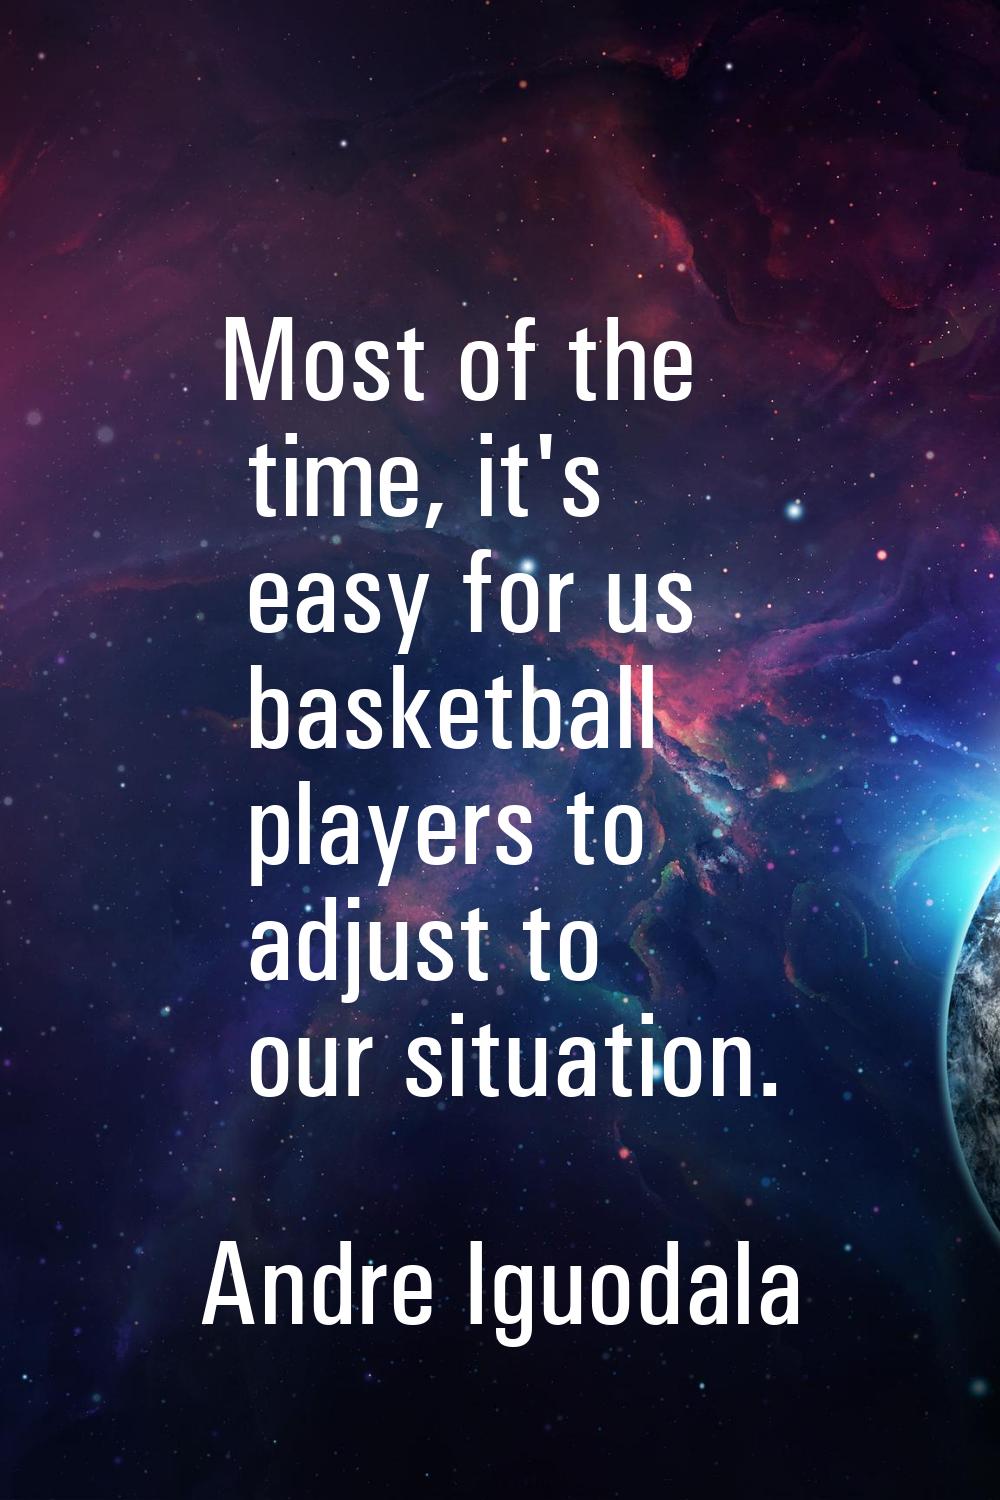 Most of the time, it's easy for us basketball players to adjust to our situation.